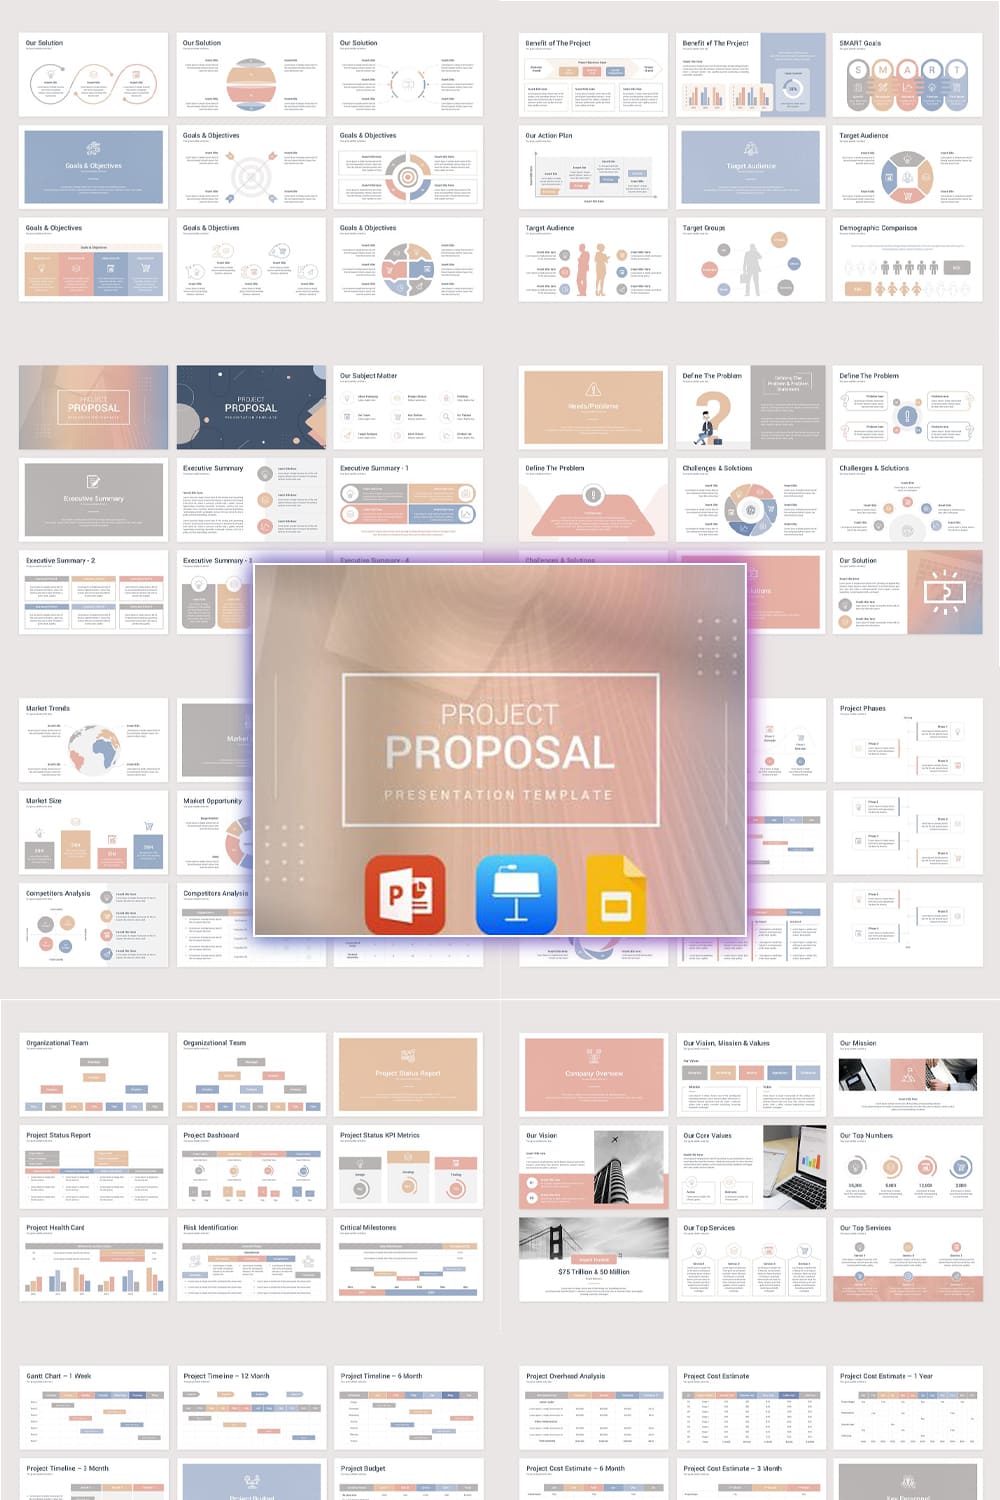 Project Proposal PowerPoint Template pinterest image.